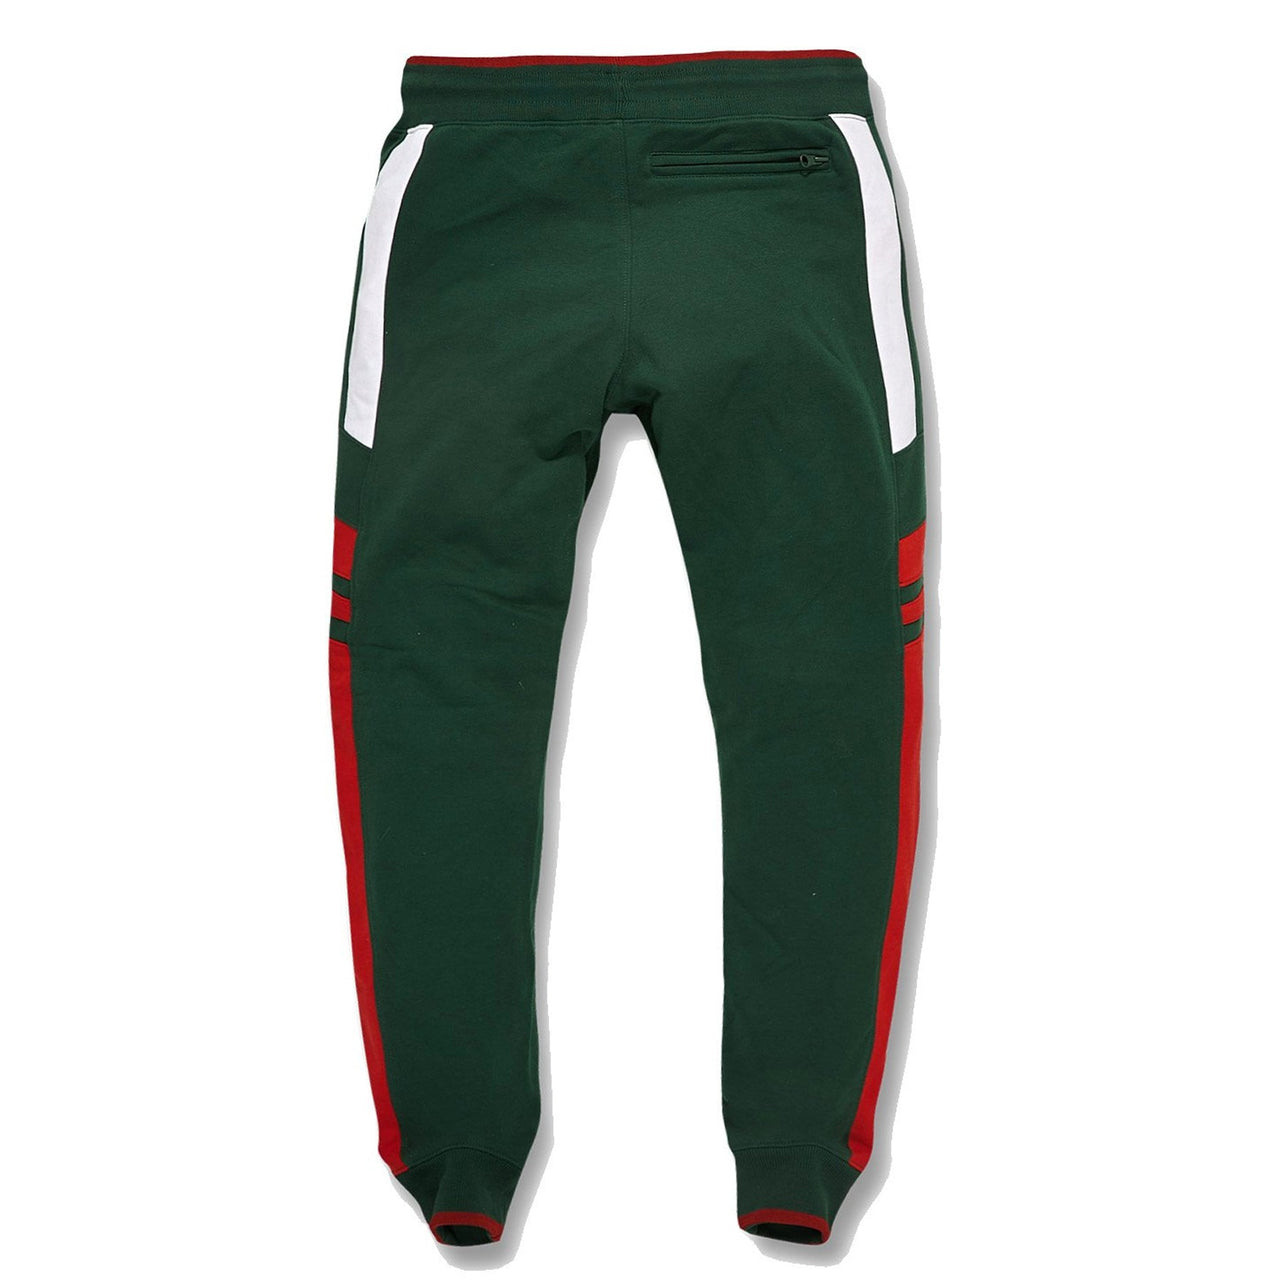 the green and red gucci colorway track pants are solid green and feature tapered ends with red accents